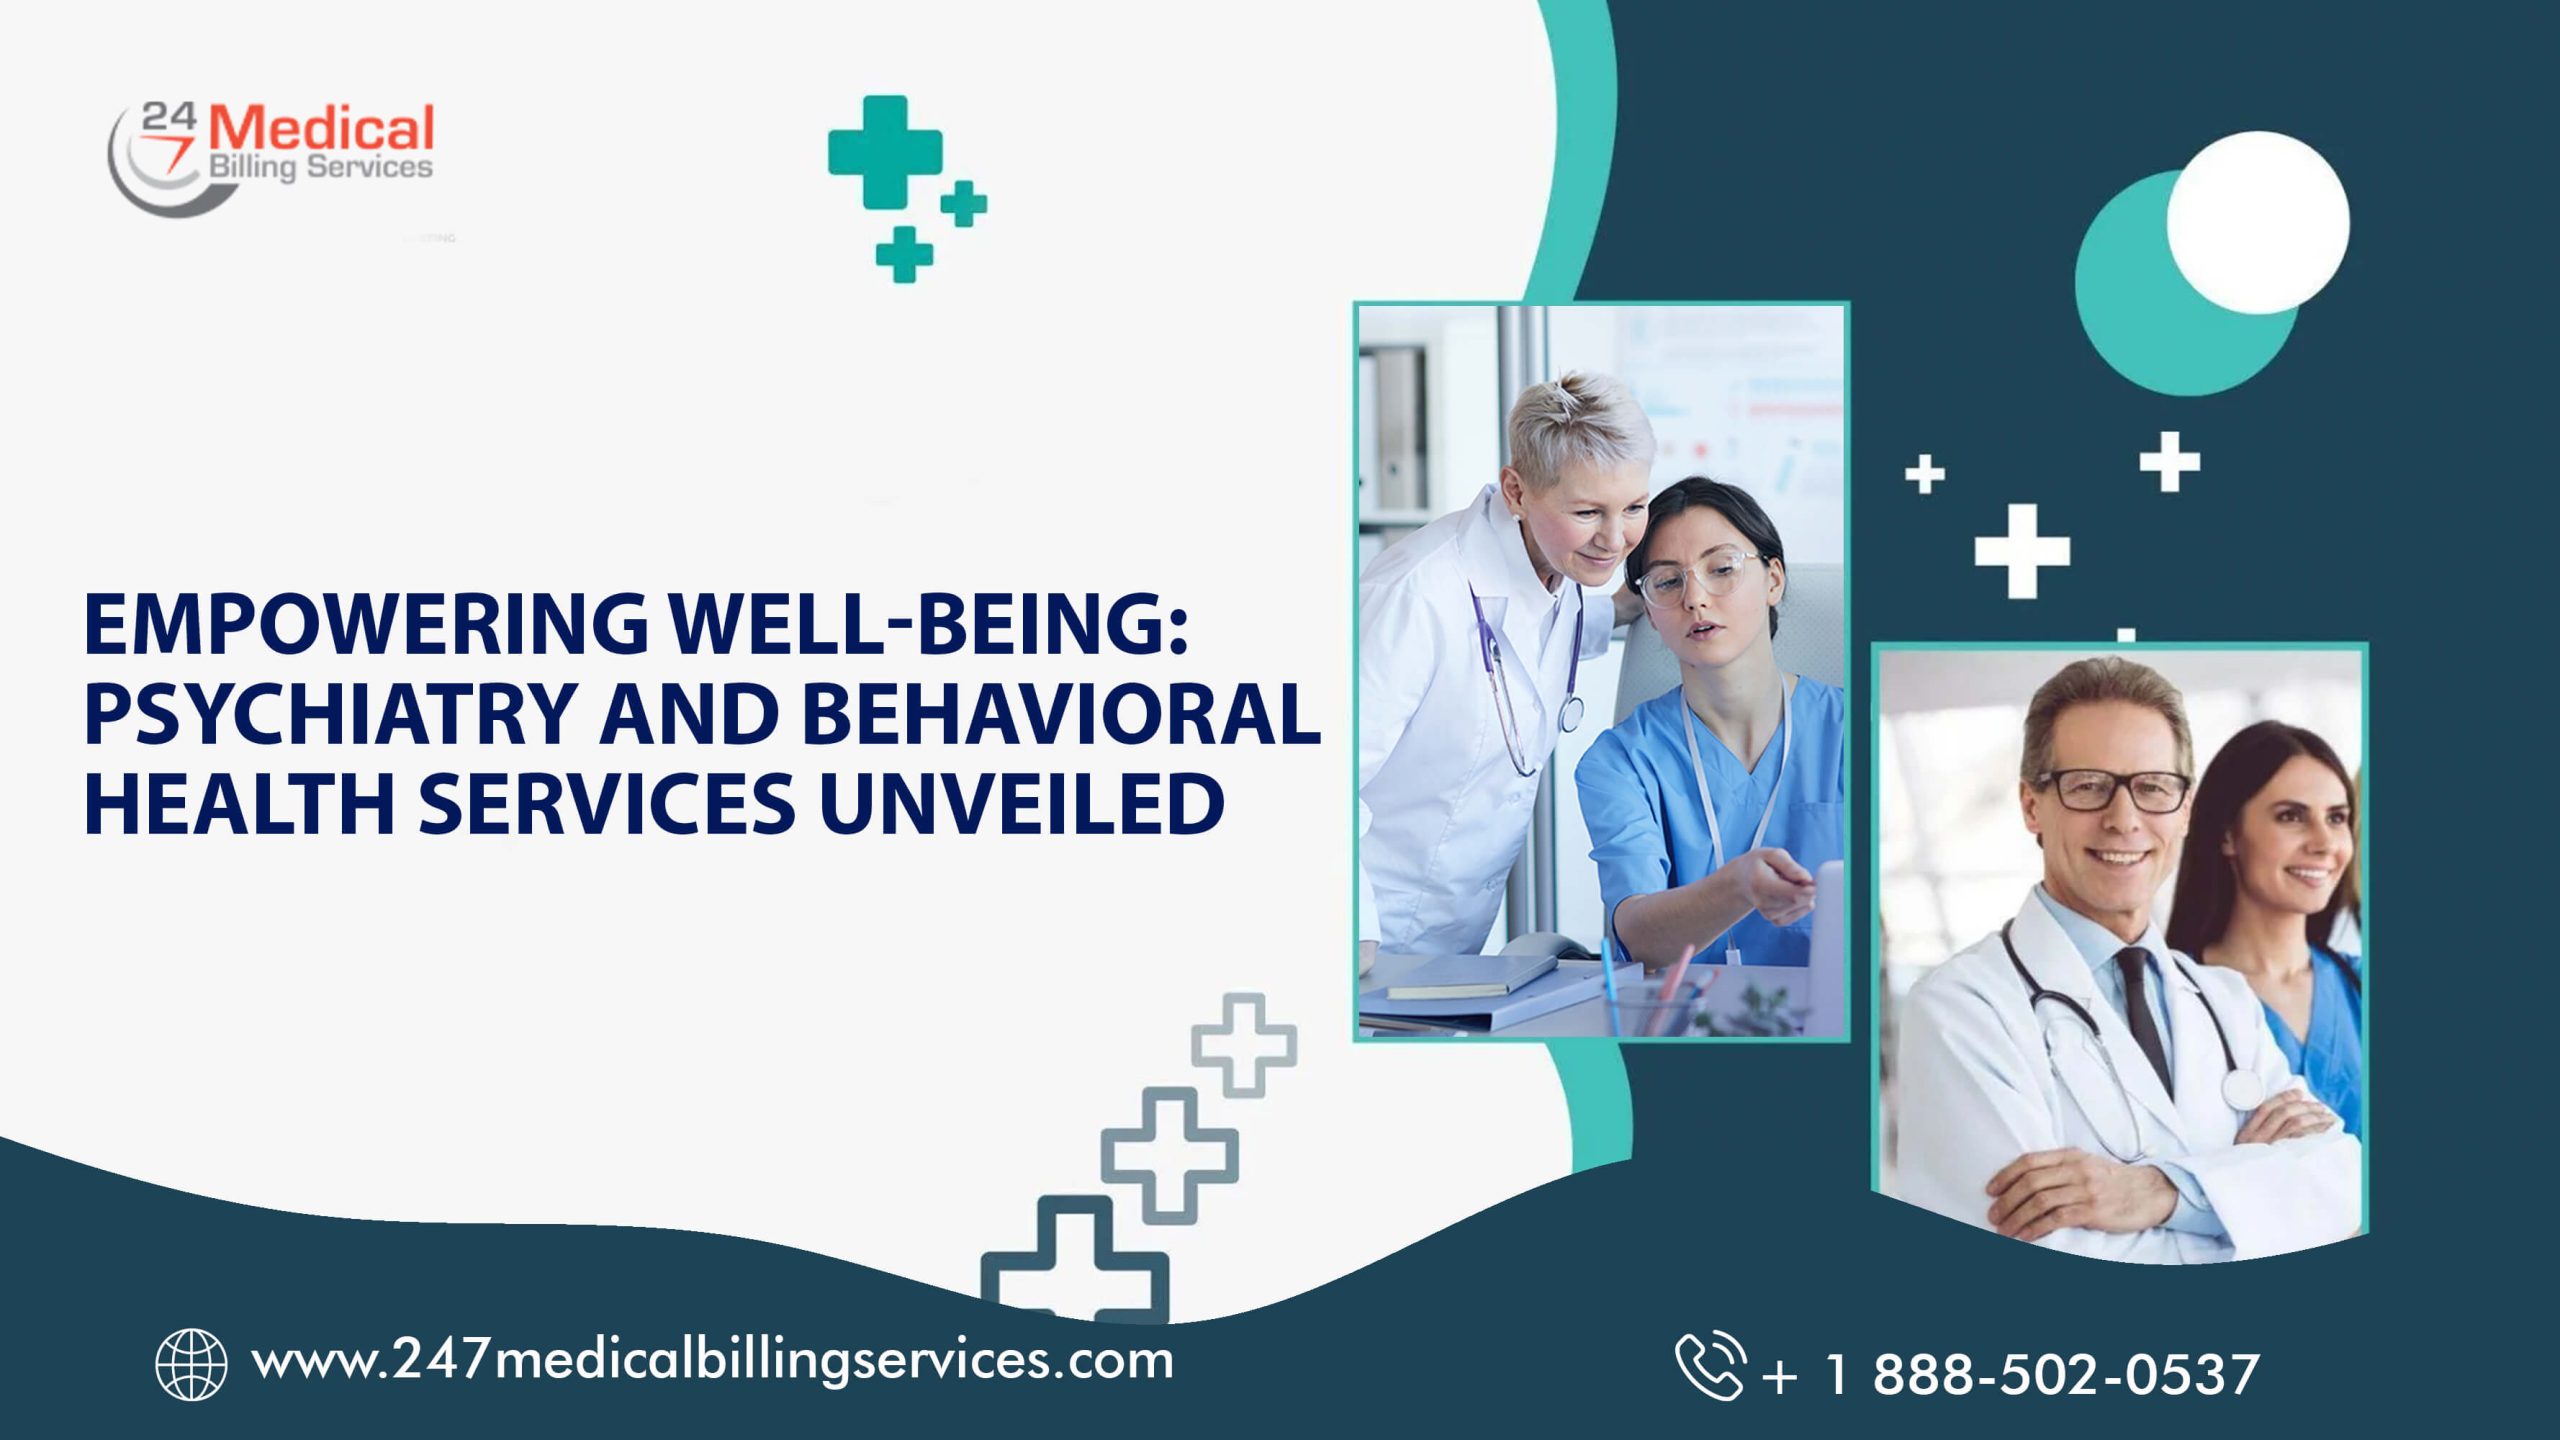  Empowering Well-Being: Psychiatry and Behavioral Health Services Unveiled